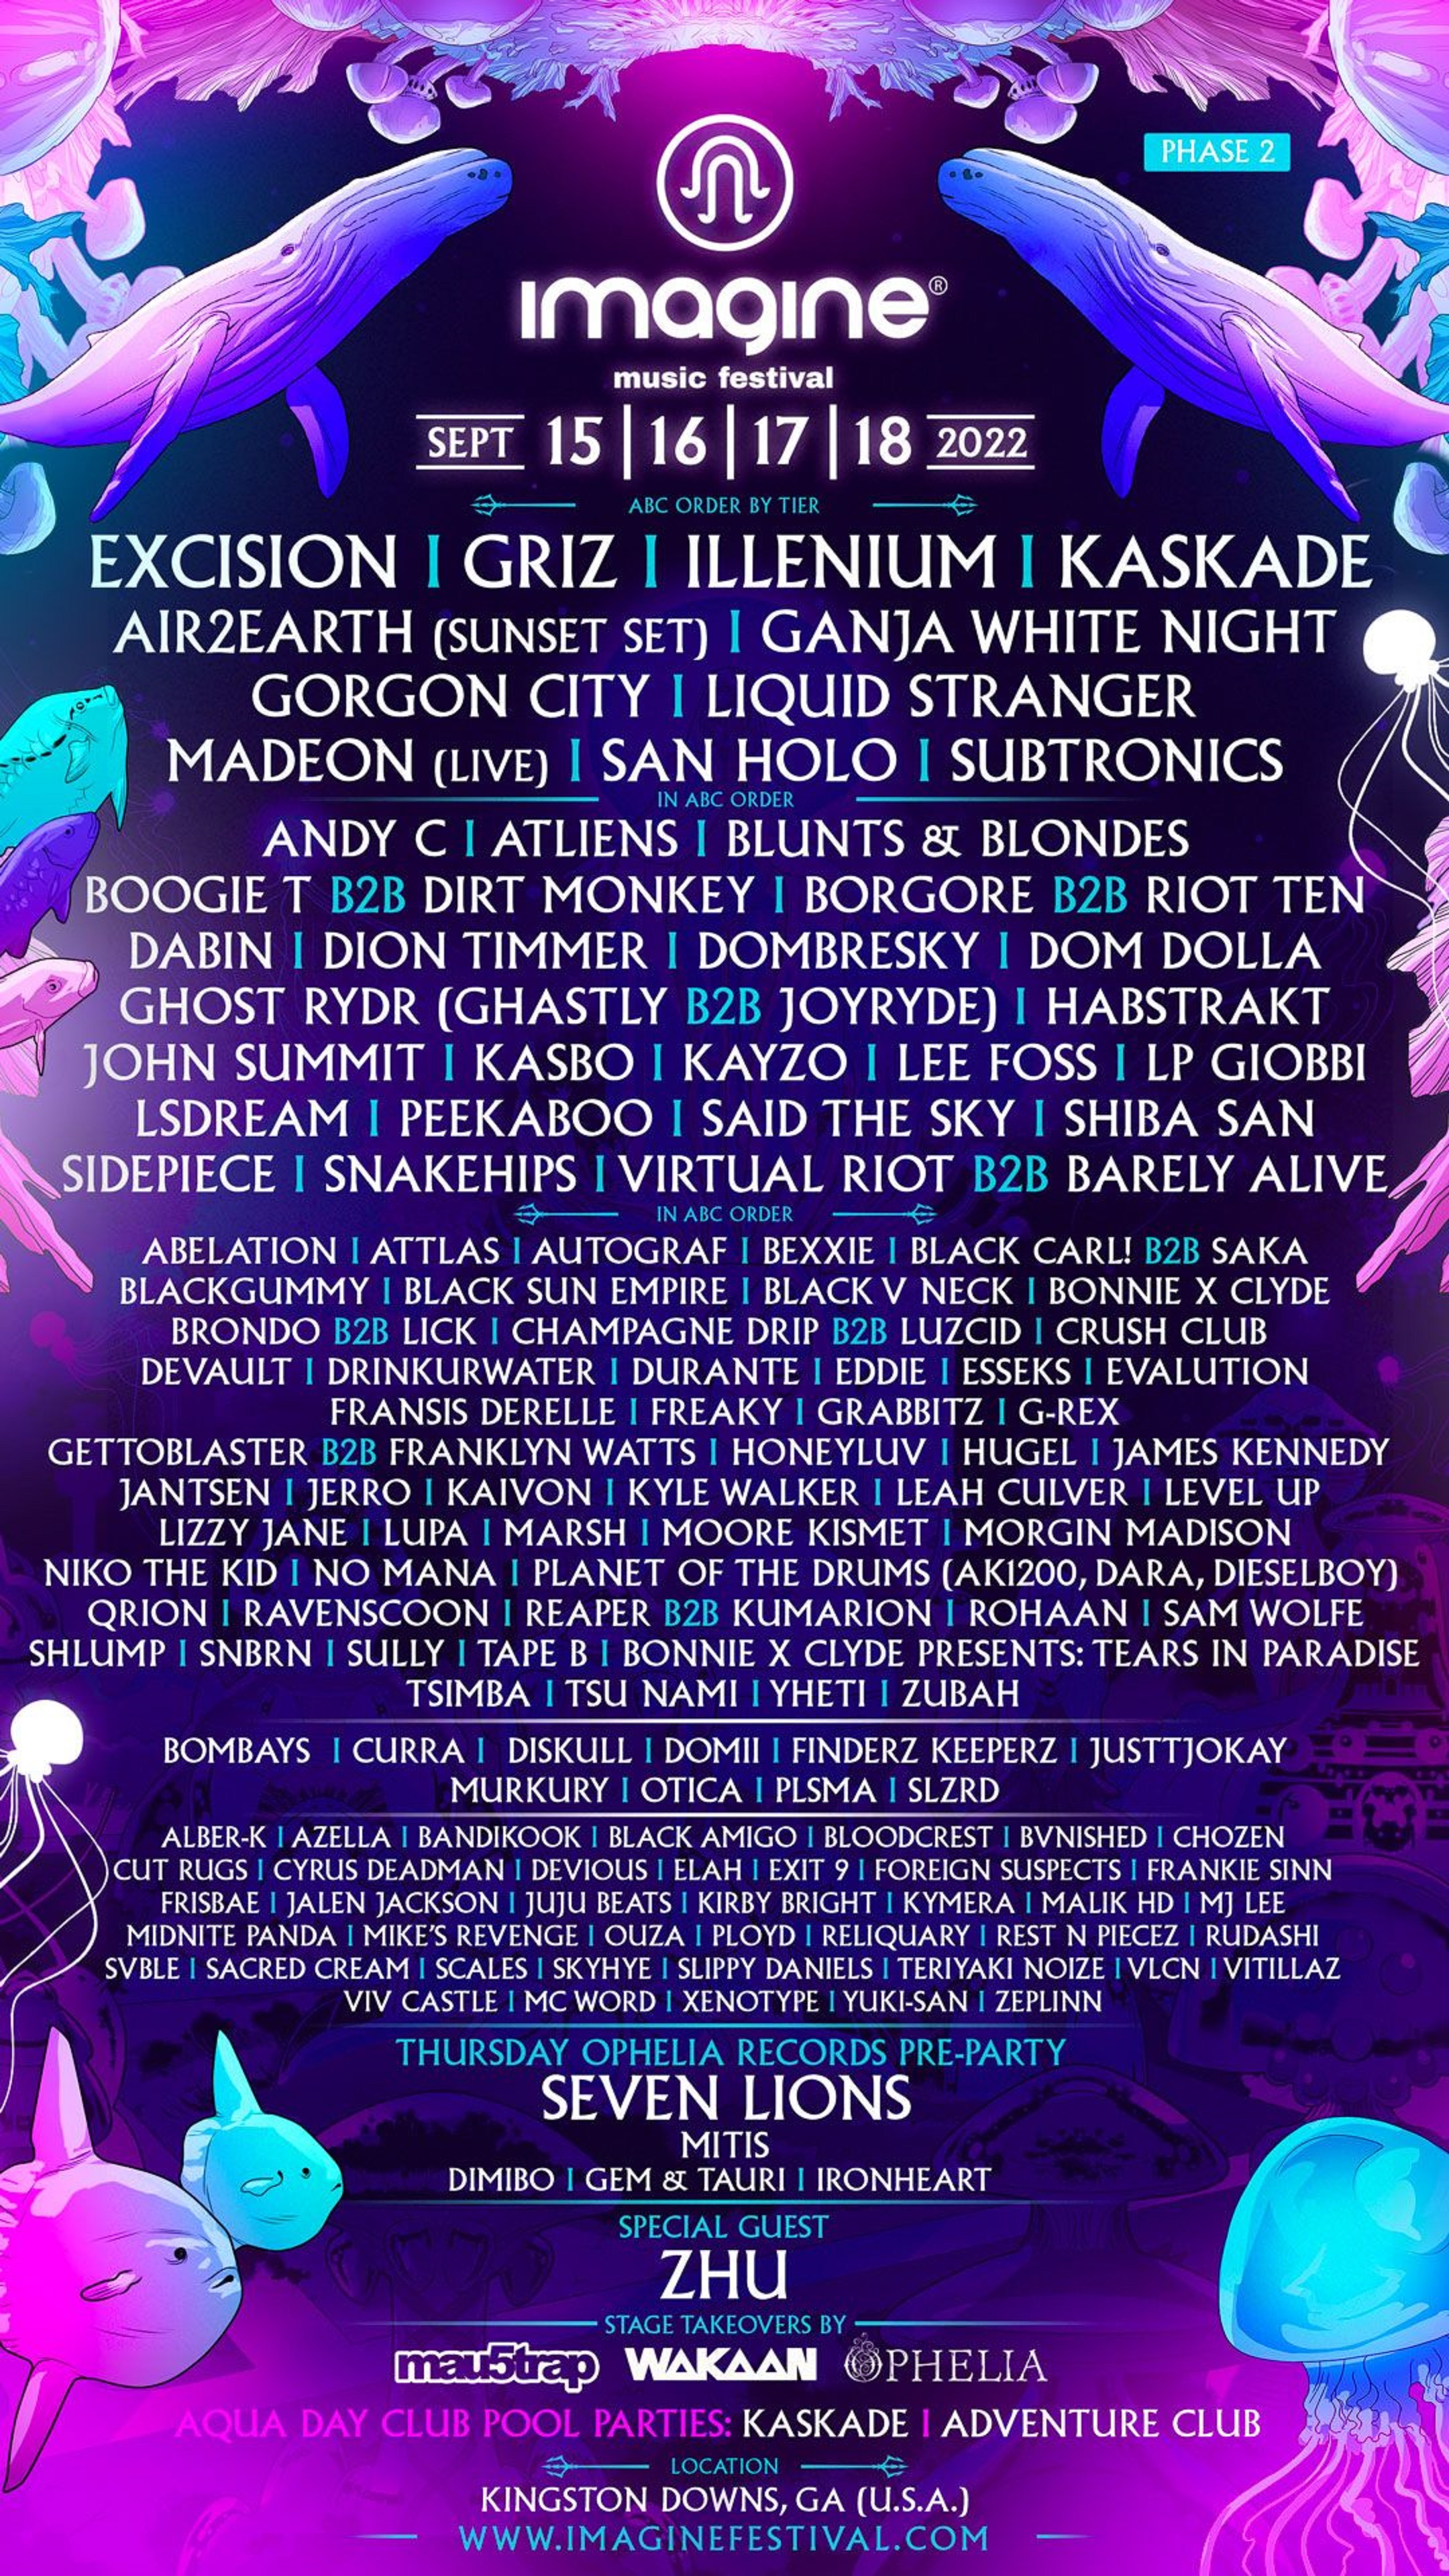 IMAGINE FESTIVAL DOUBLES DOWN WITH PHASE 02 LINEUP